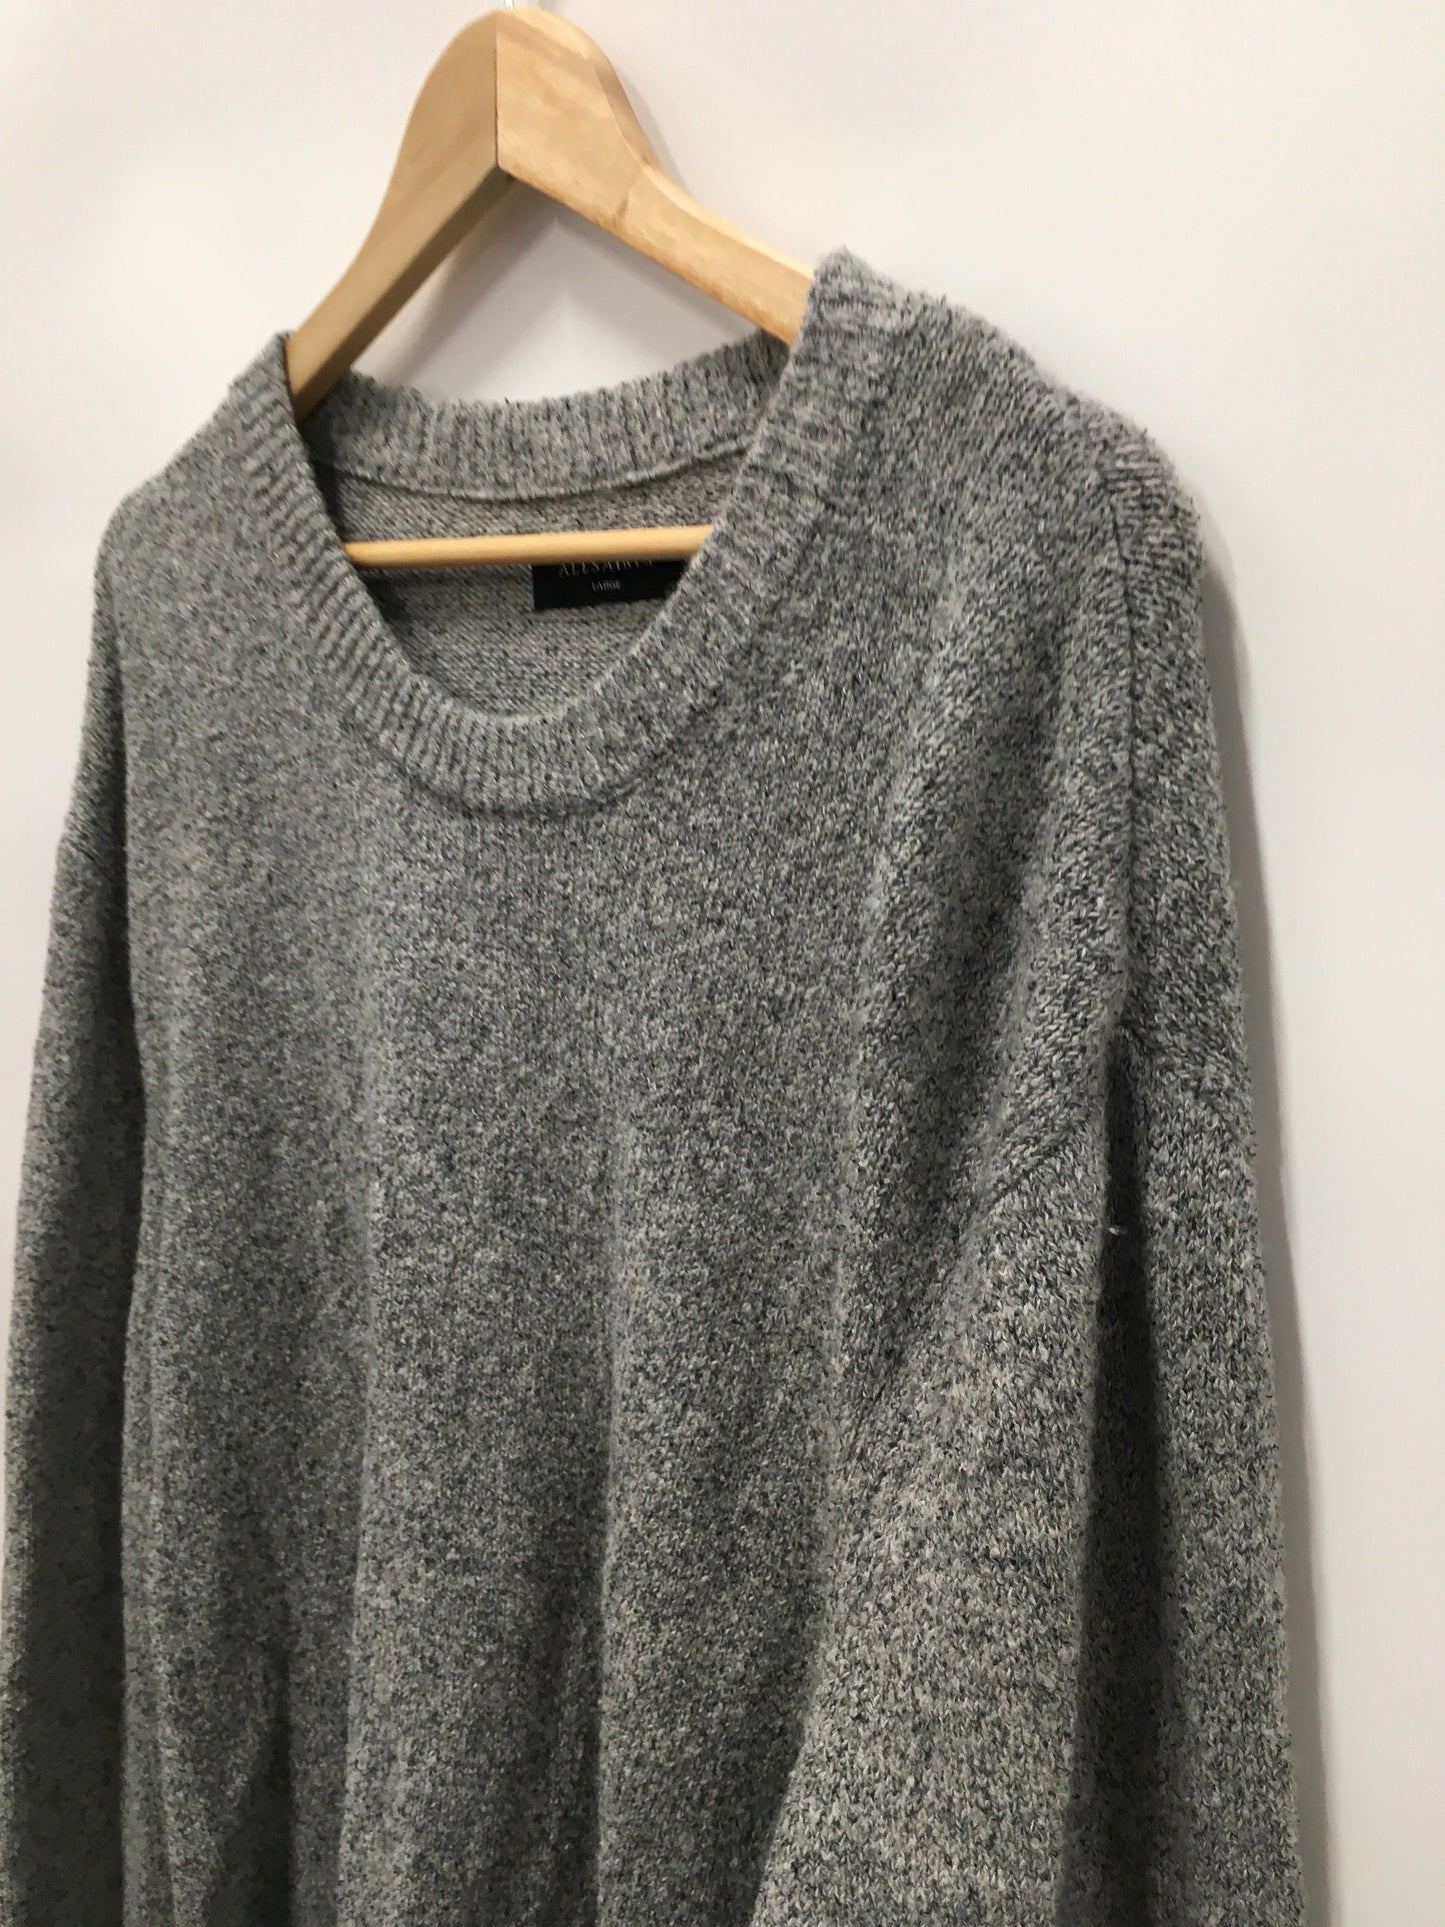 Sweater By All Saints  Size: L